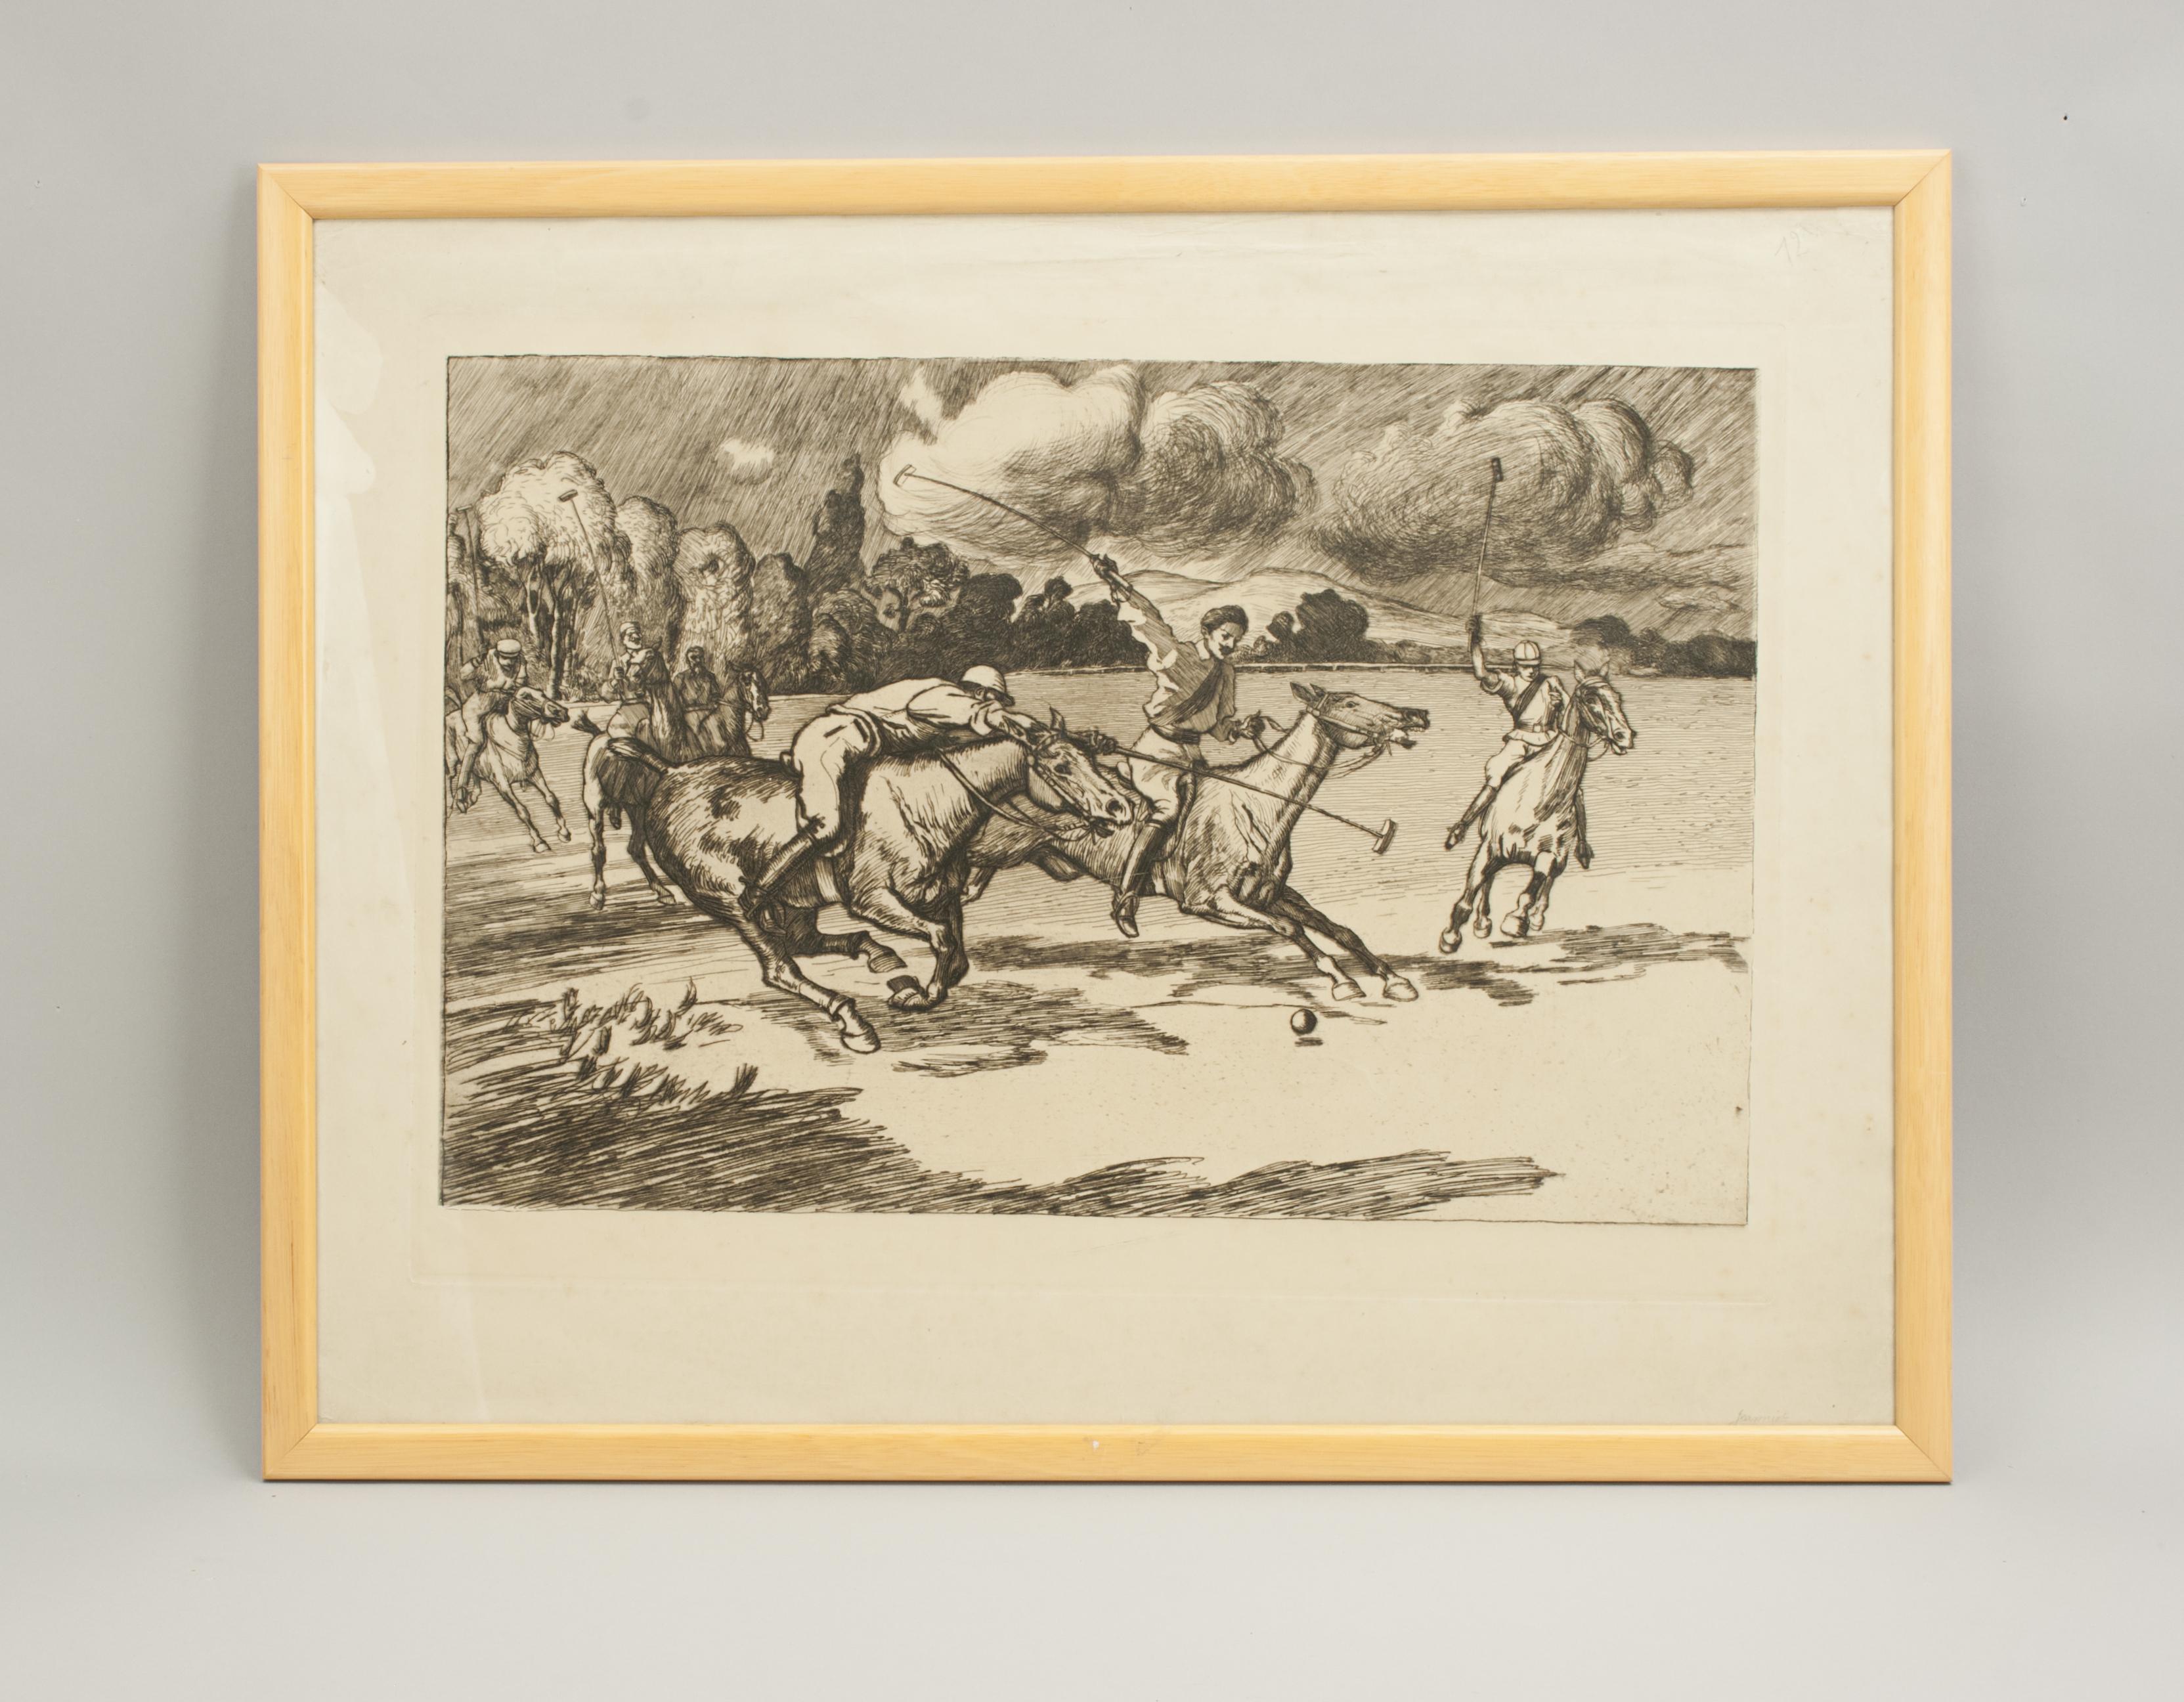 Sporting Art Polo Etching, Polo Match by Pierre, Georges Jeaniott For Sale